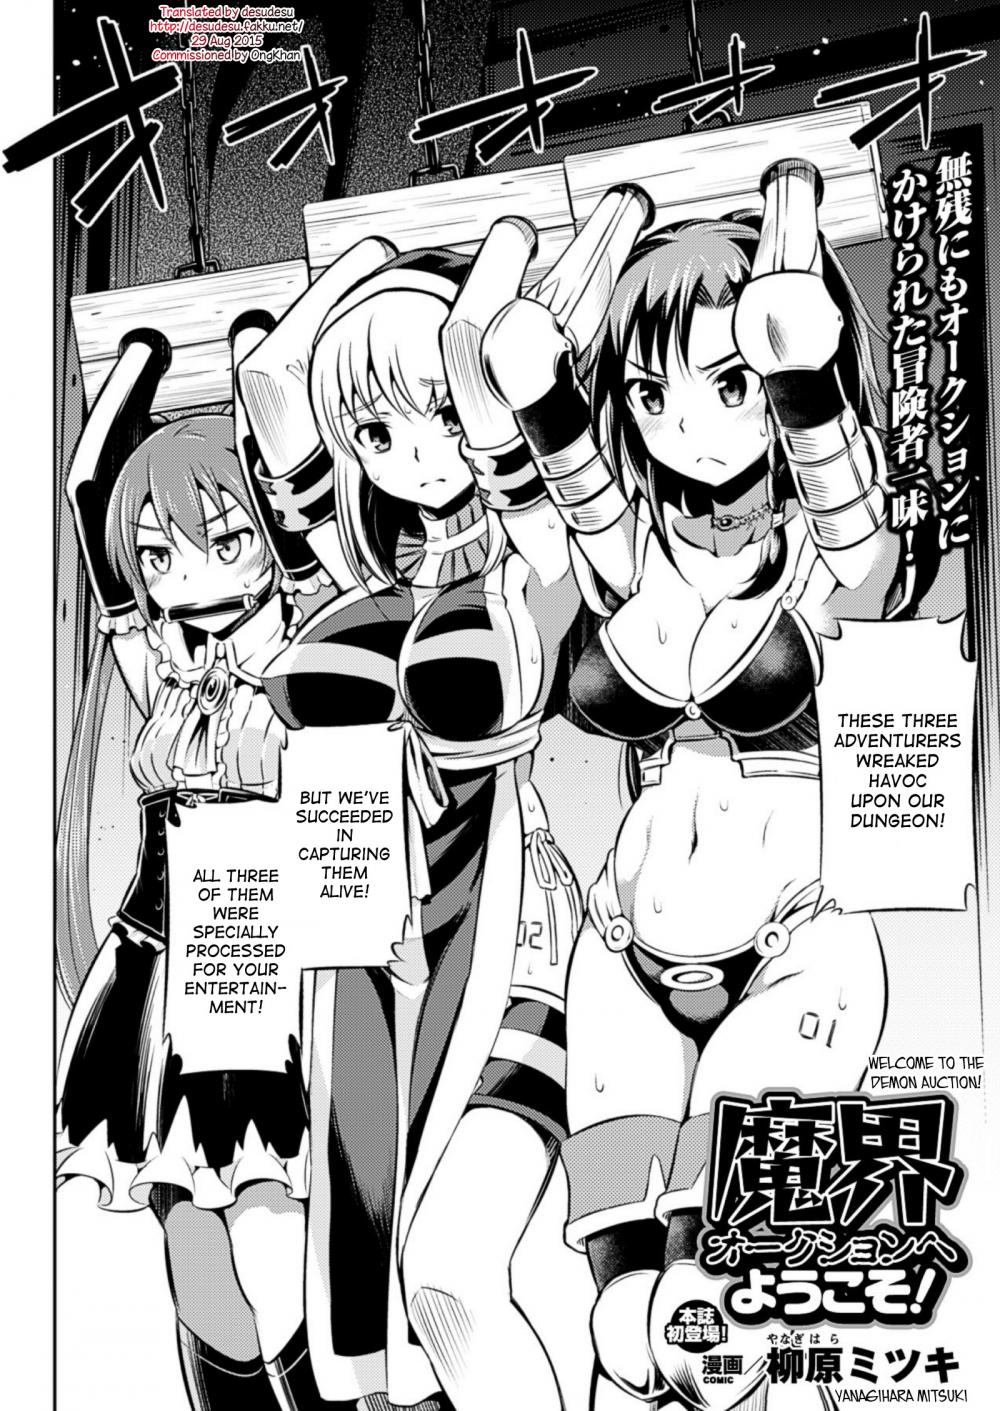 Welcome to the Demon Auction-Read-Hentai Manga Hentai Comic - Page: 2 -  Online porn video at mobile